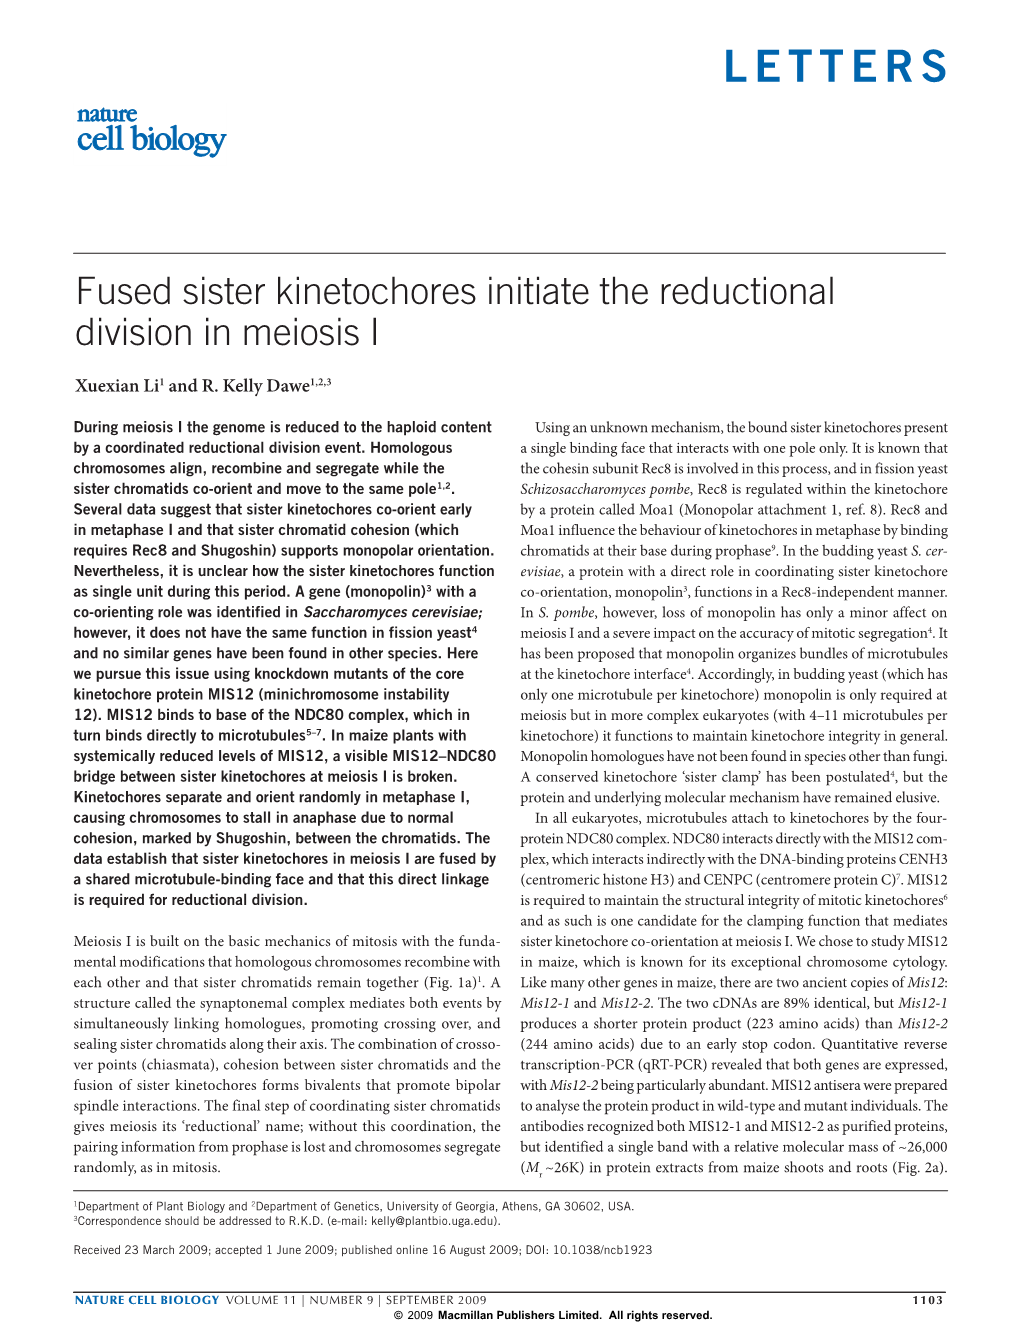 Fused Sister Kinetochores Initiate the Reductional Division in Meiosis I